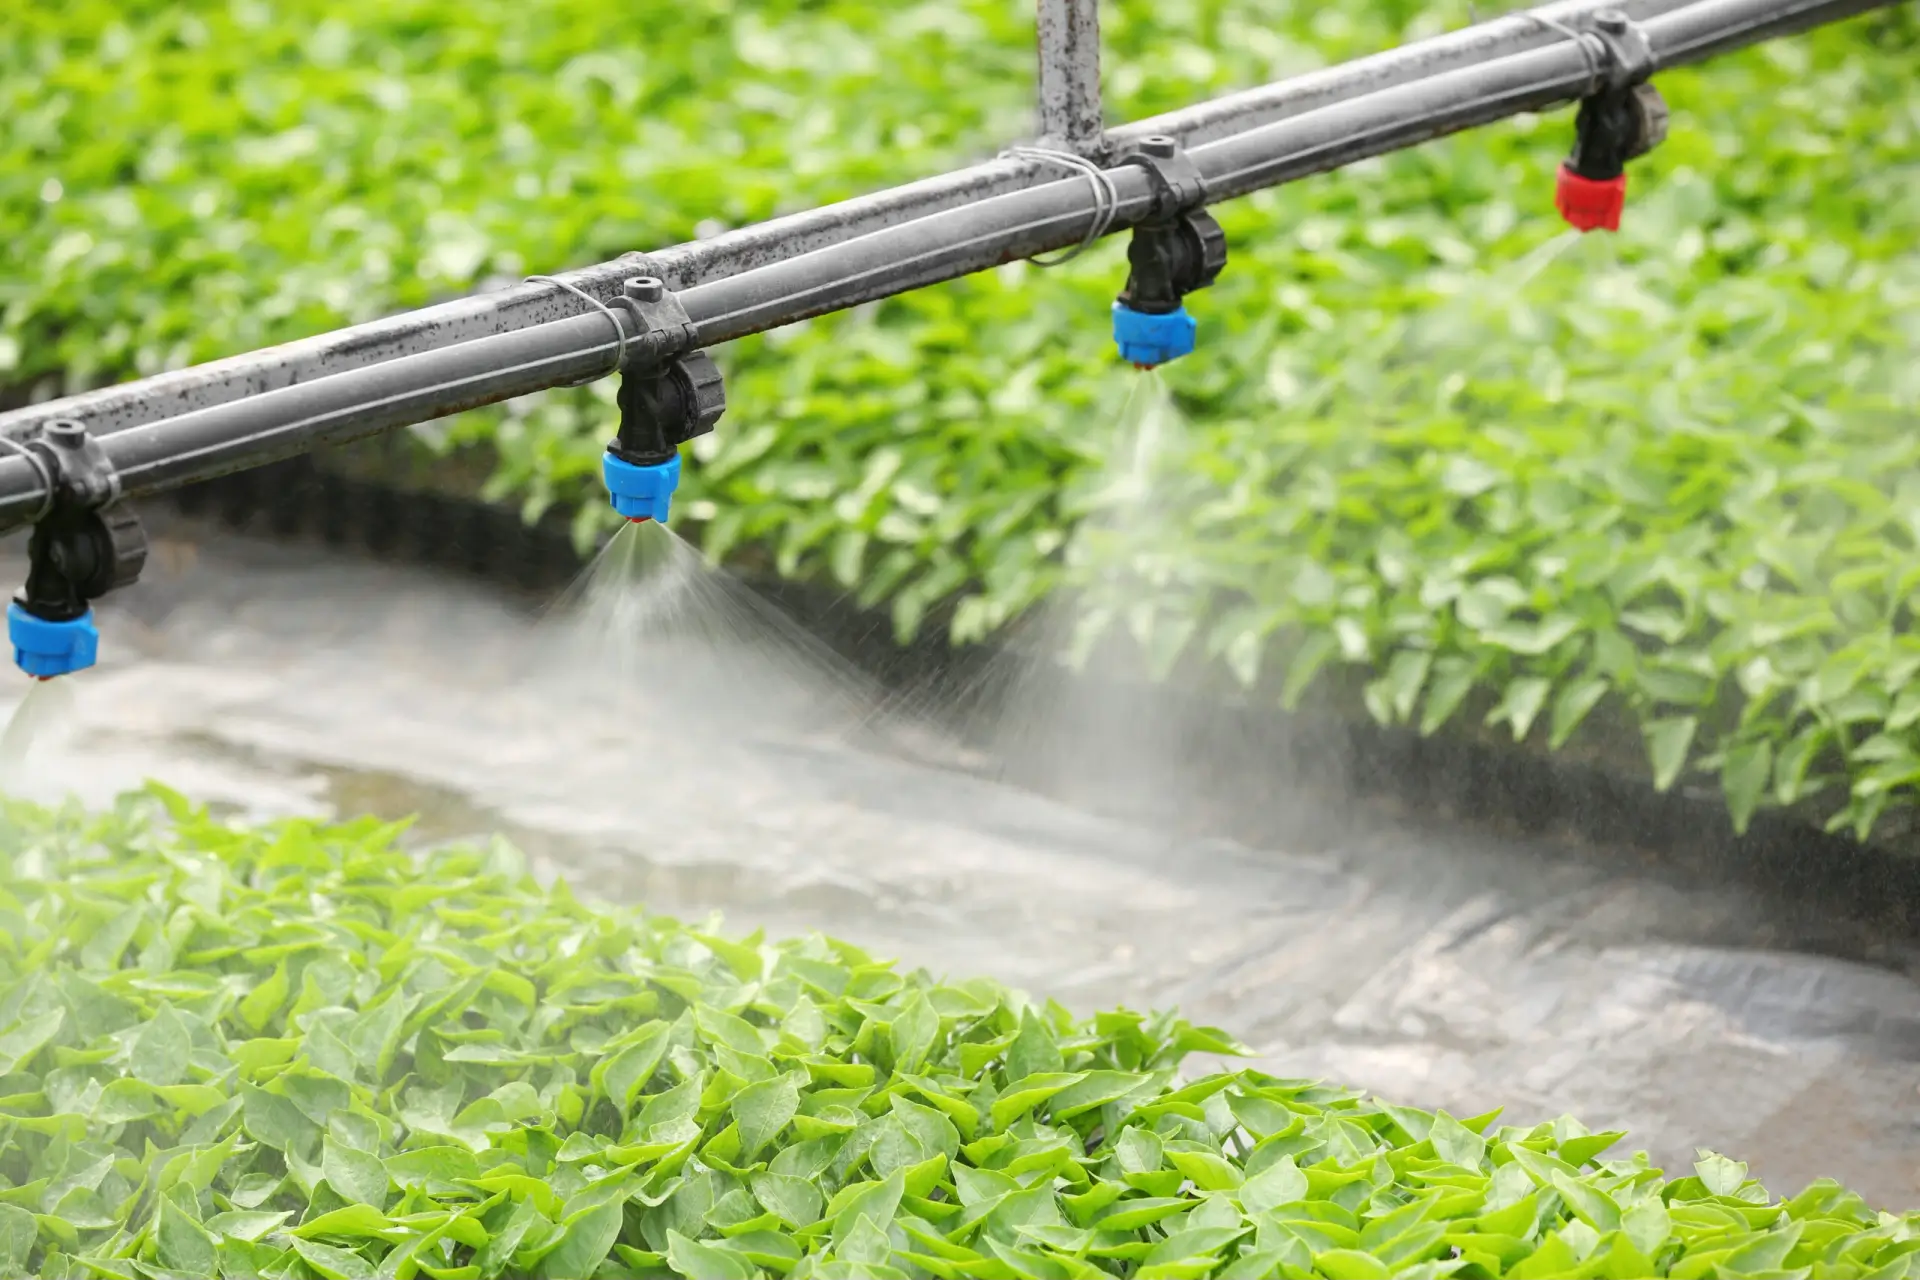 A hydroponic system demonstrating direct application of water and nutrients to plants' roots, showcasing efficient and controlled cultivation for optimal growth and yield.